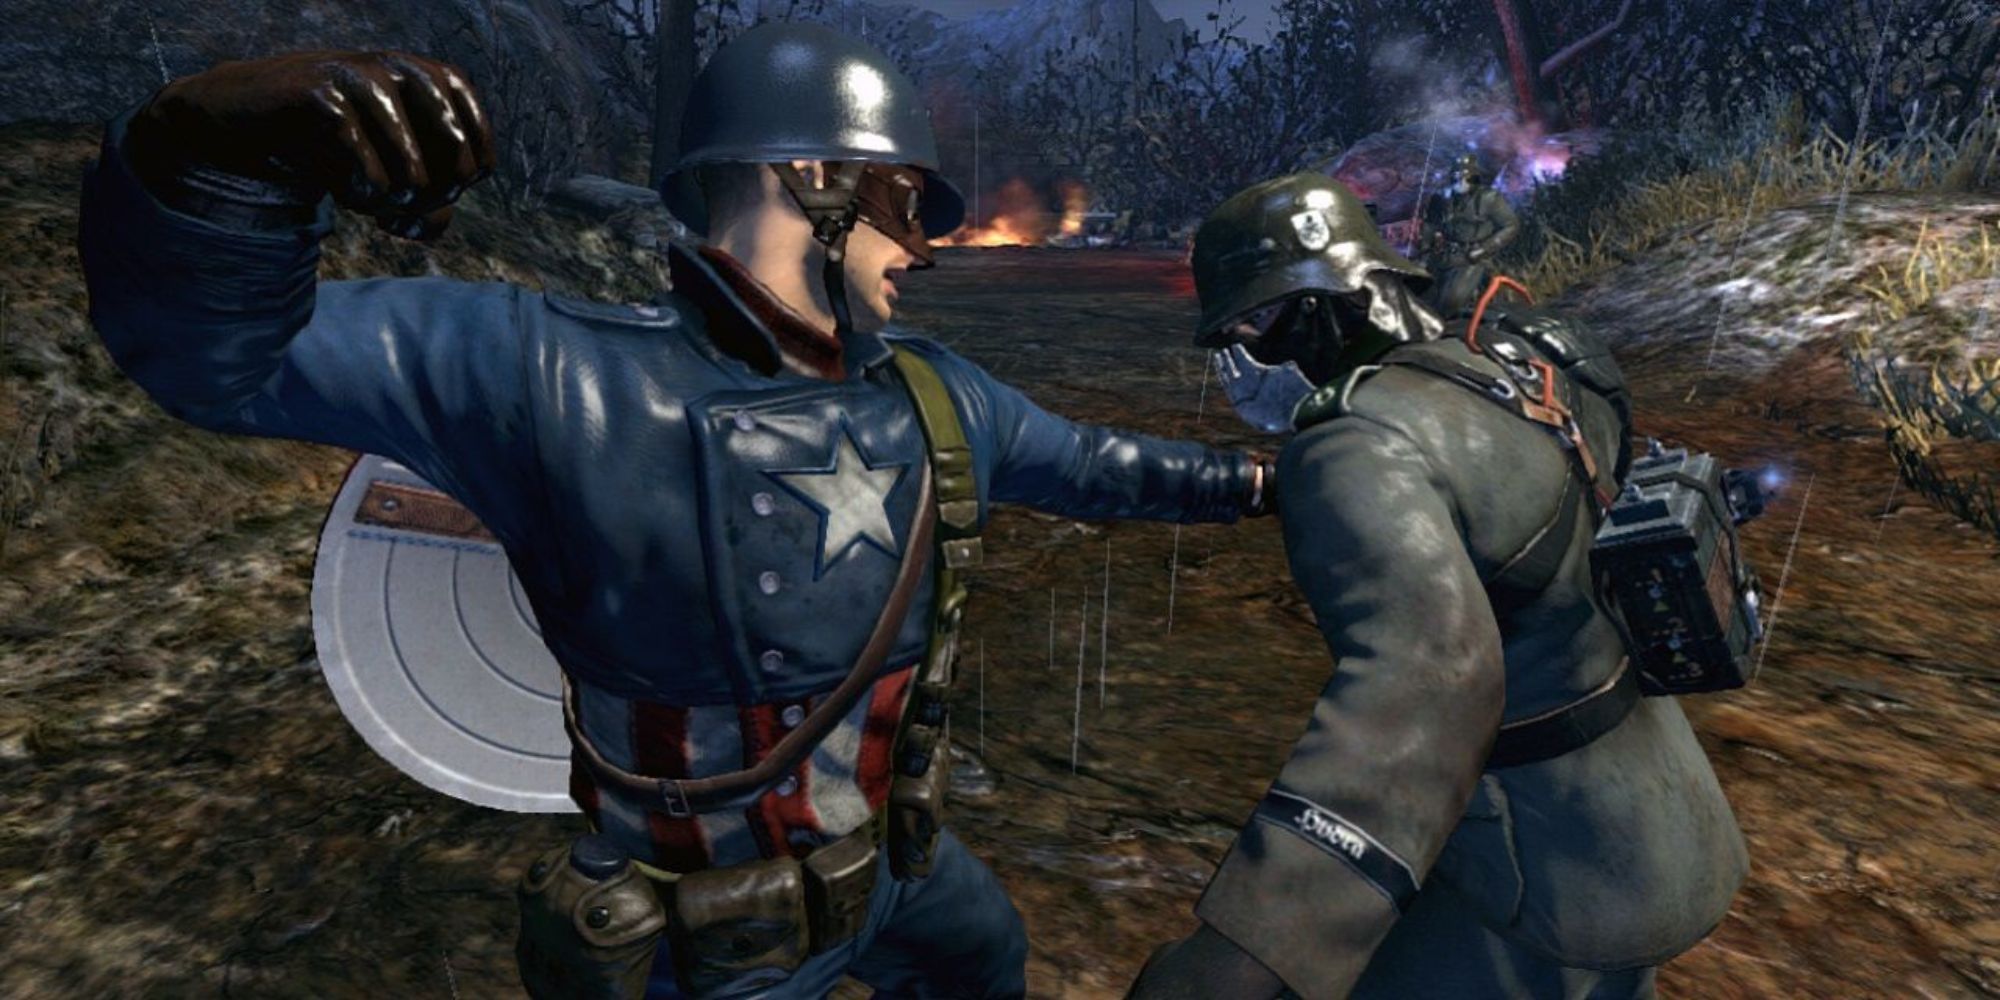 Captain America attacks an enemy soldier on a dirt road